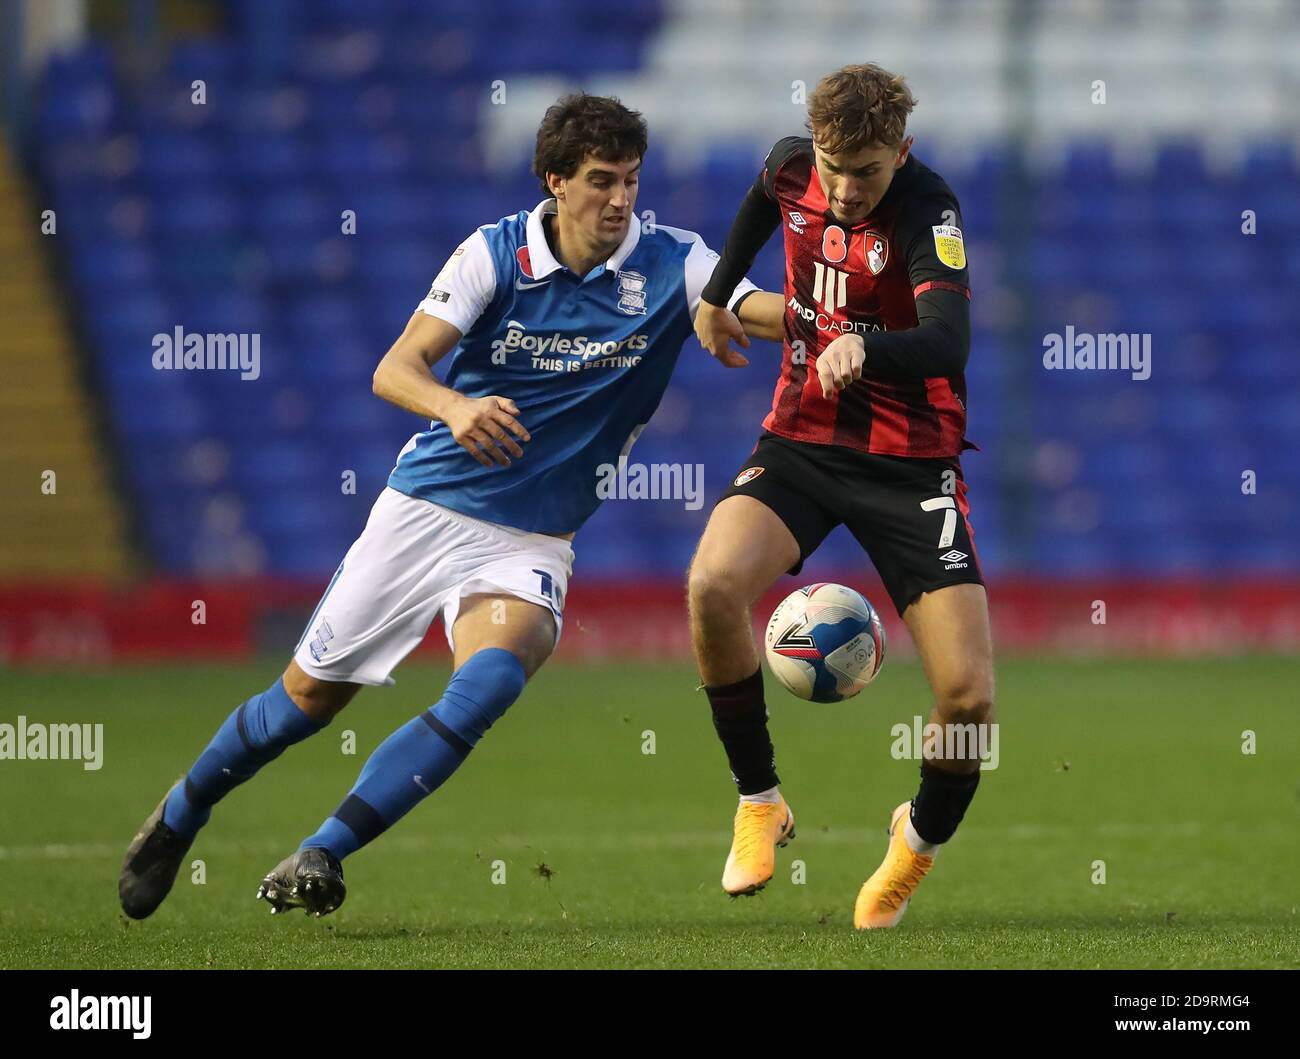 Birmingham City's Mikel San Jose (left) and AFC Bournemouth's David Brooks battle for the ball during the Sky Bet Championship match at St. Andrew's Trillion Trophy Stadium, Birmingham. Stock Photo